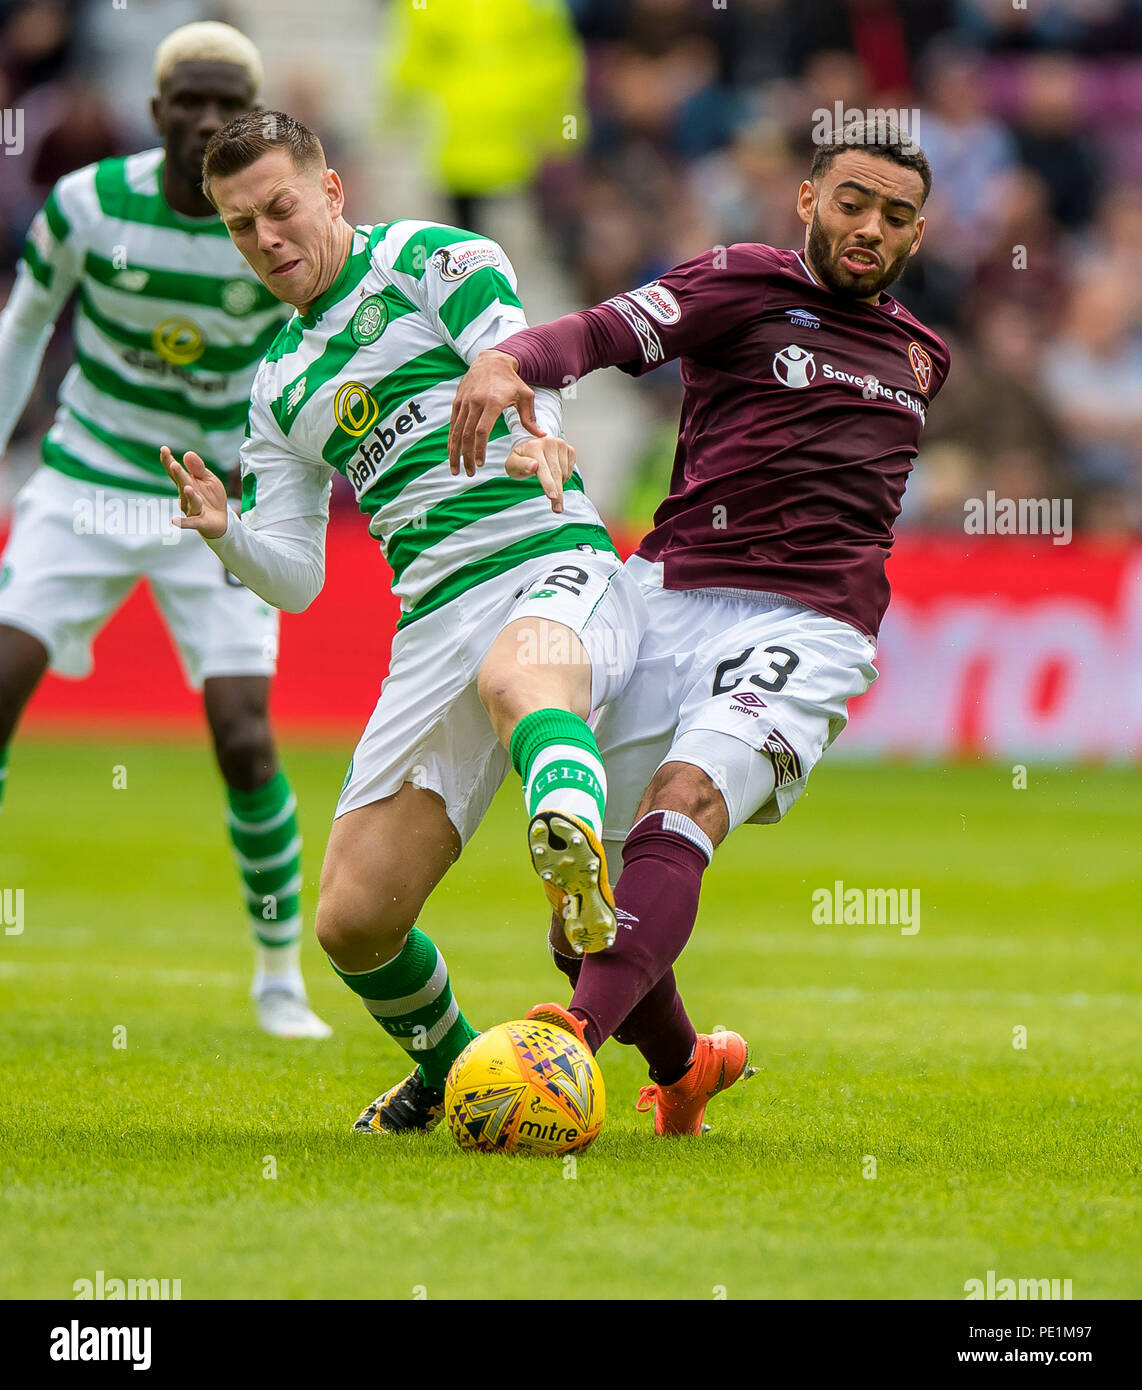 Celtic's Callum McGregor and Hearts' Jake Mulraney compete for the ball during the Ladbrokes Scottish Premiership match at Tynecastle Stadium, Edinburgh. PRESS ASSOCIATION Photo. Picture date: Saturday August 11, 2018. See PA story soccer Hearts. Photo credit should read: Craig Watson/PA Wire. EDITORIAL USE ONLY Stock Photo